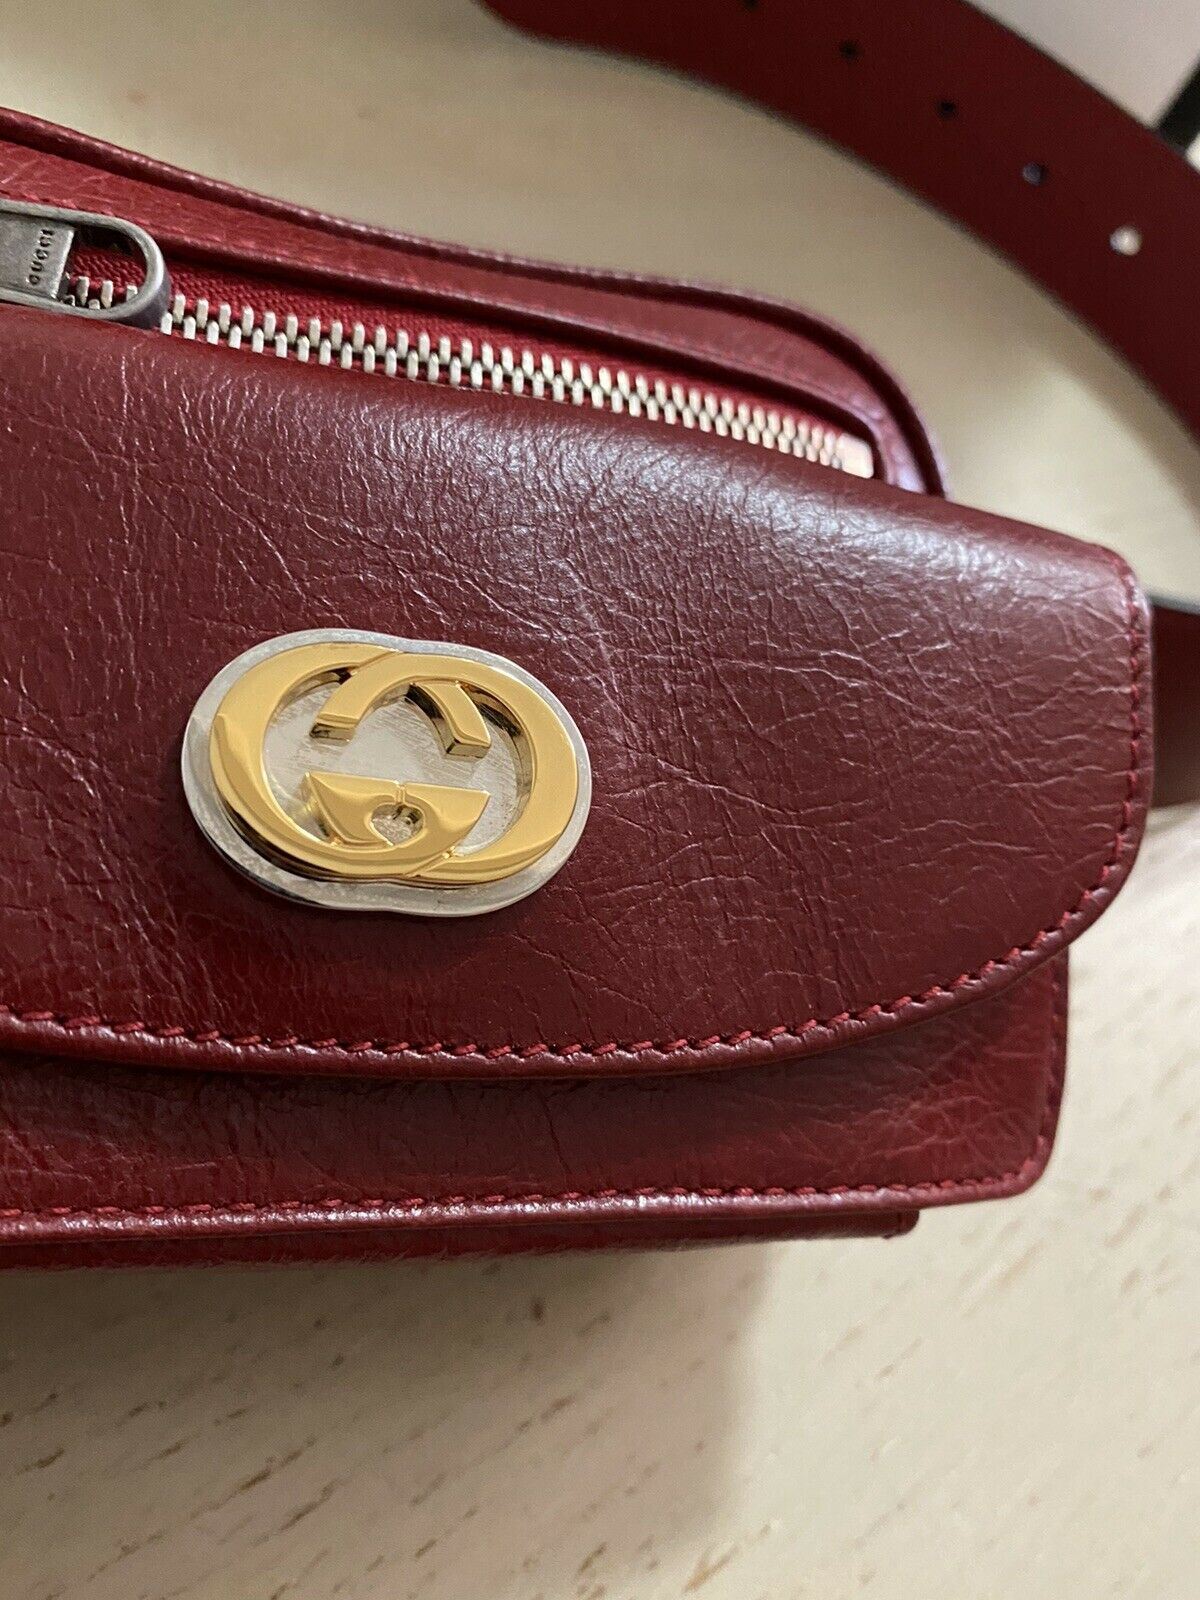 New Gucci GG Marmont Matelasse Leather Belt Bag Red 597676 Size 70/28 Italy